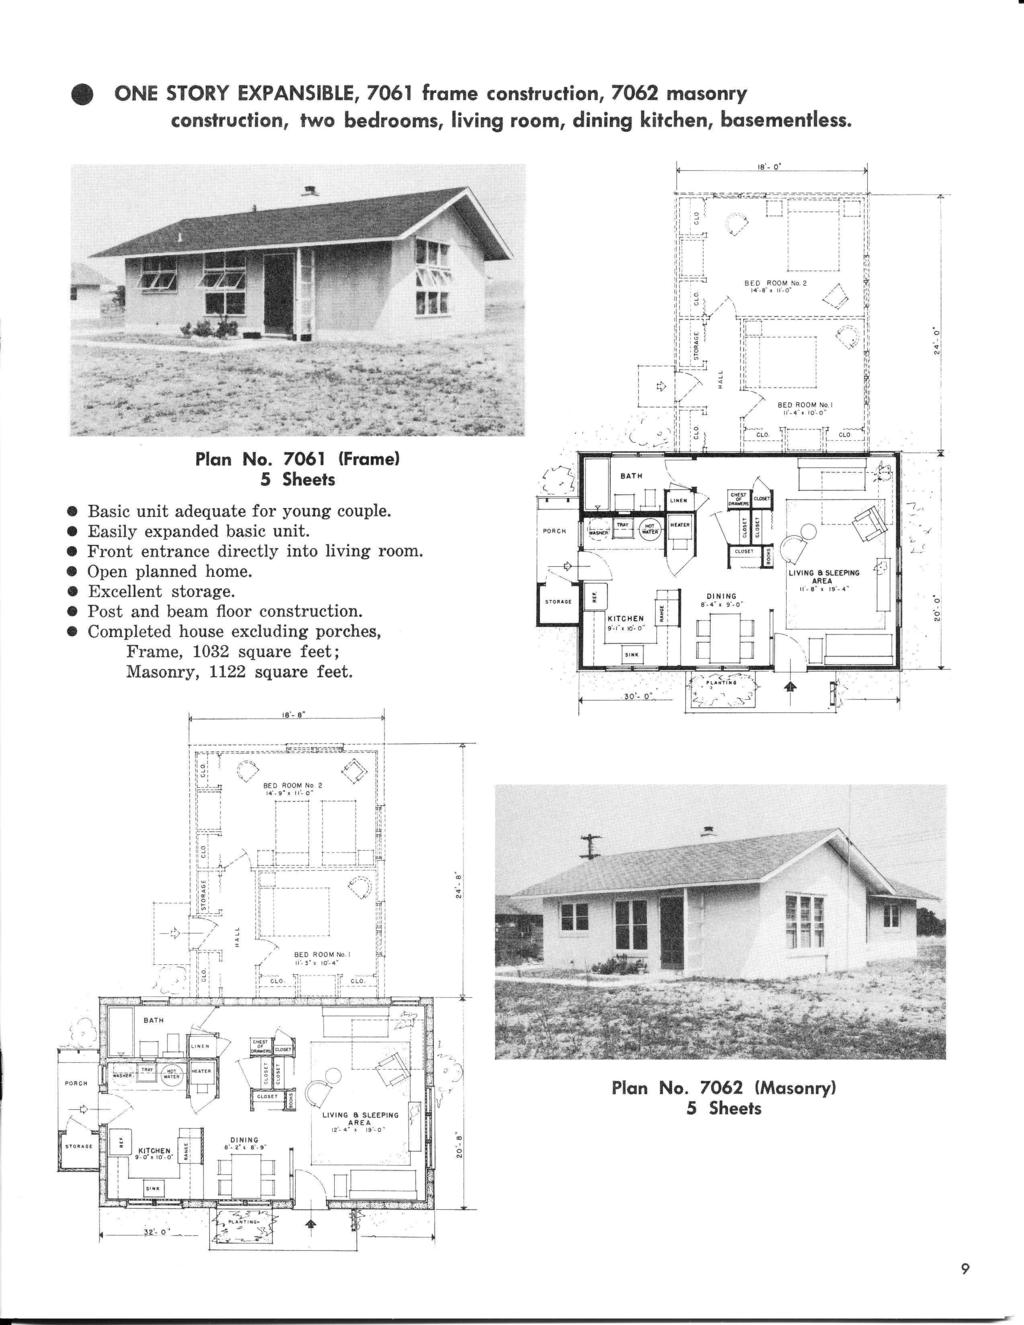 ONE STORY EXPANSBLE 7061 frame construction 7062 masonry construction two bedrooms living room dining kitchen basementless. Plan No. 7061 (Frame) 5 Sheets Basic unit adequate for young couple.